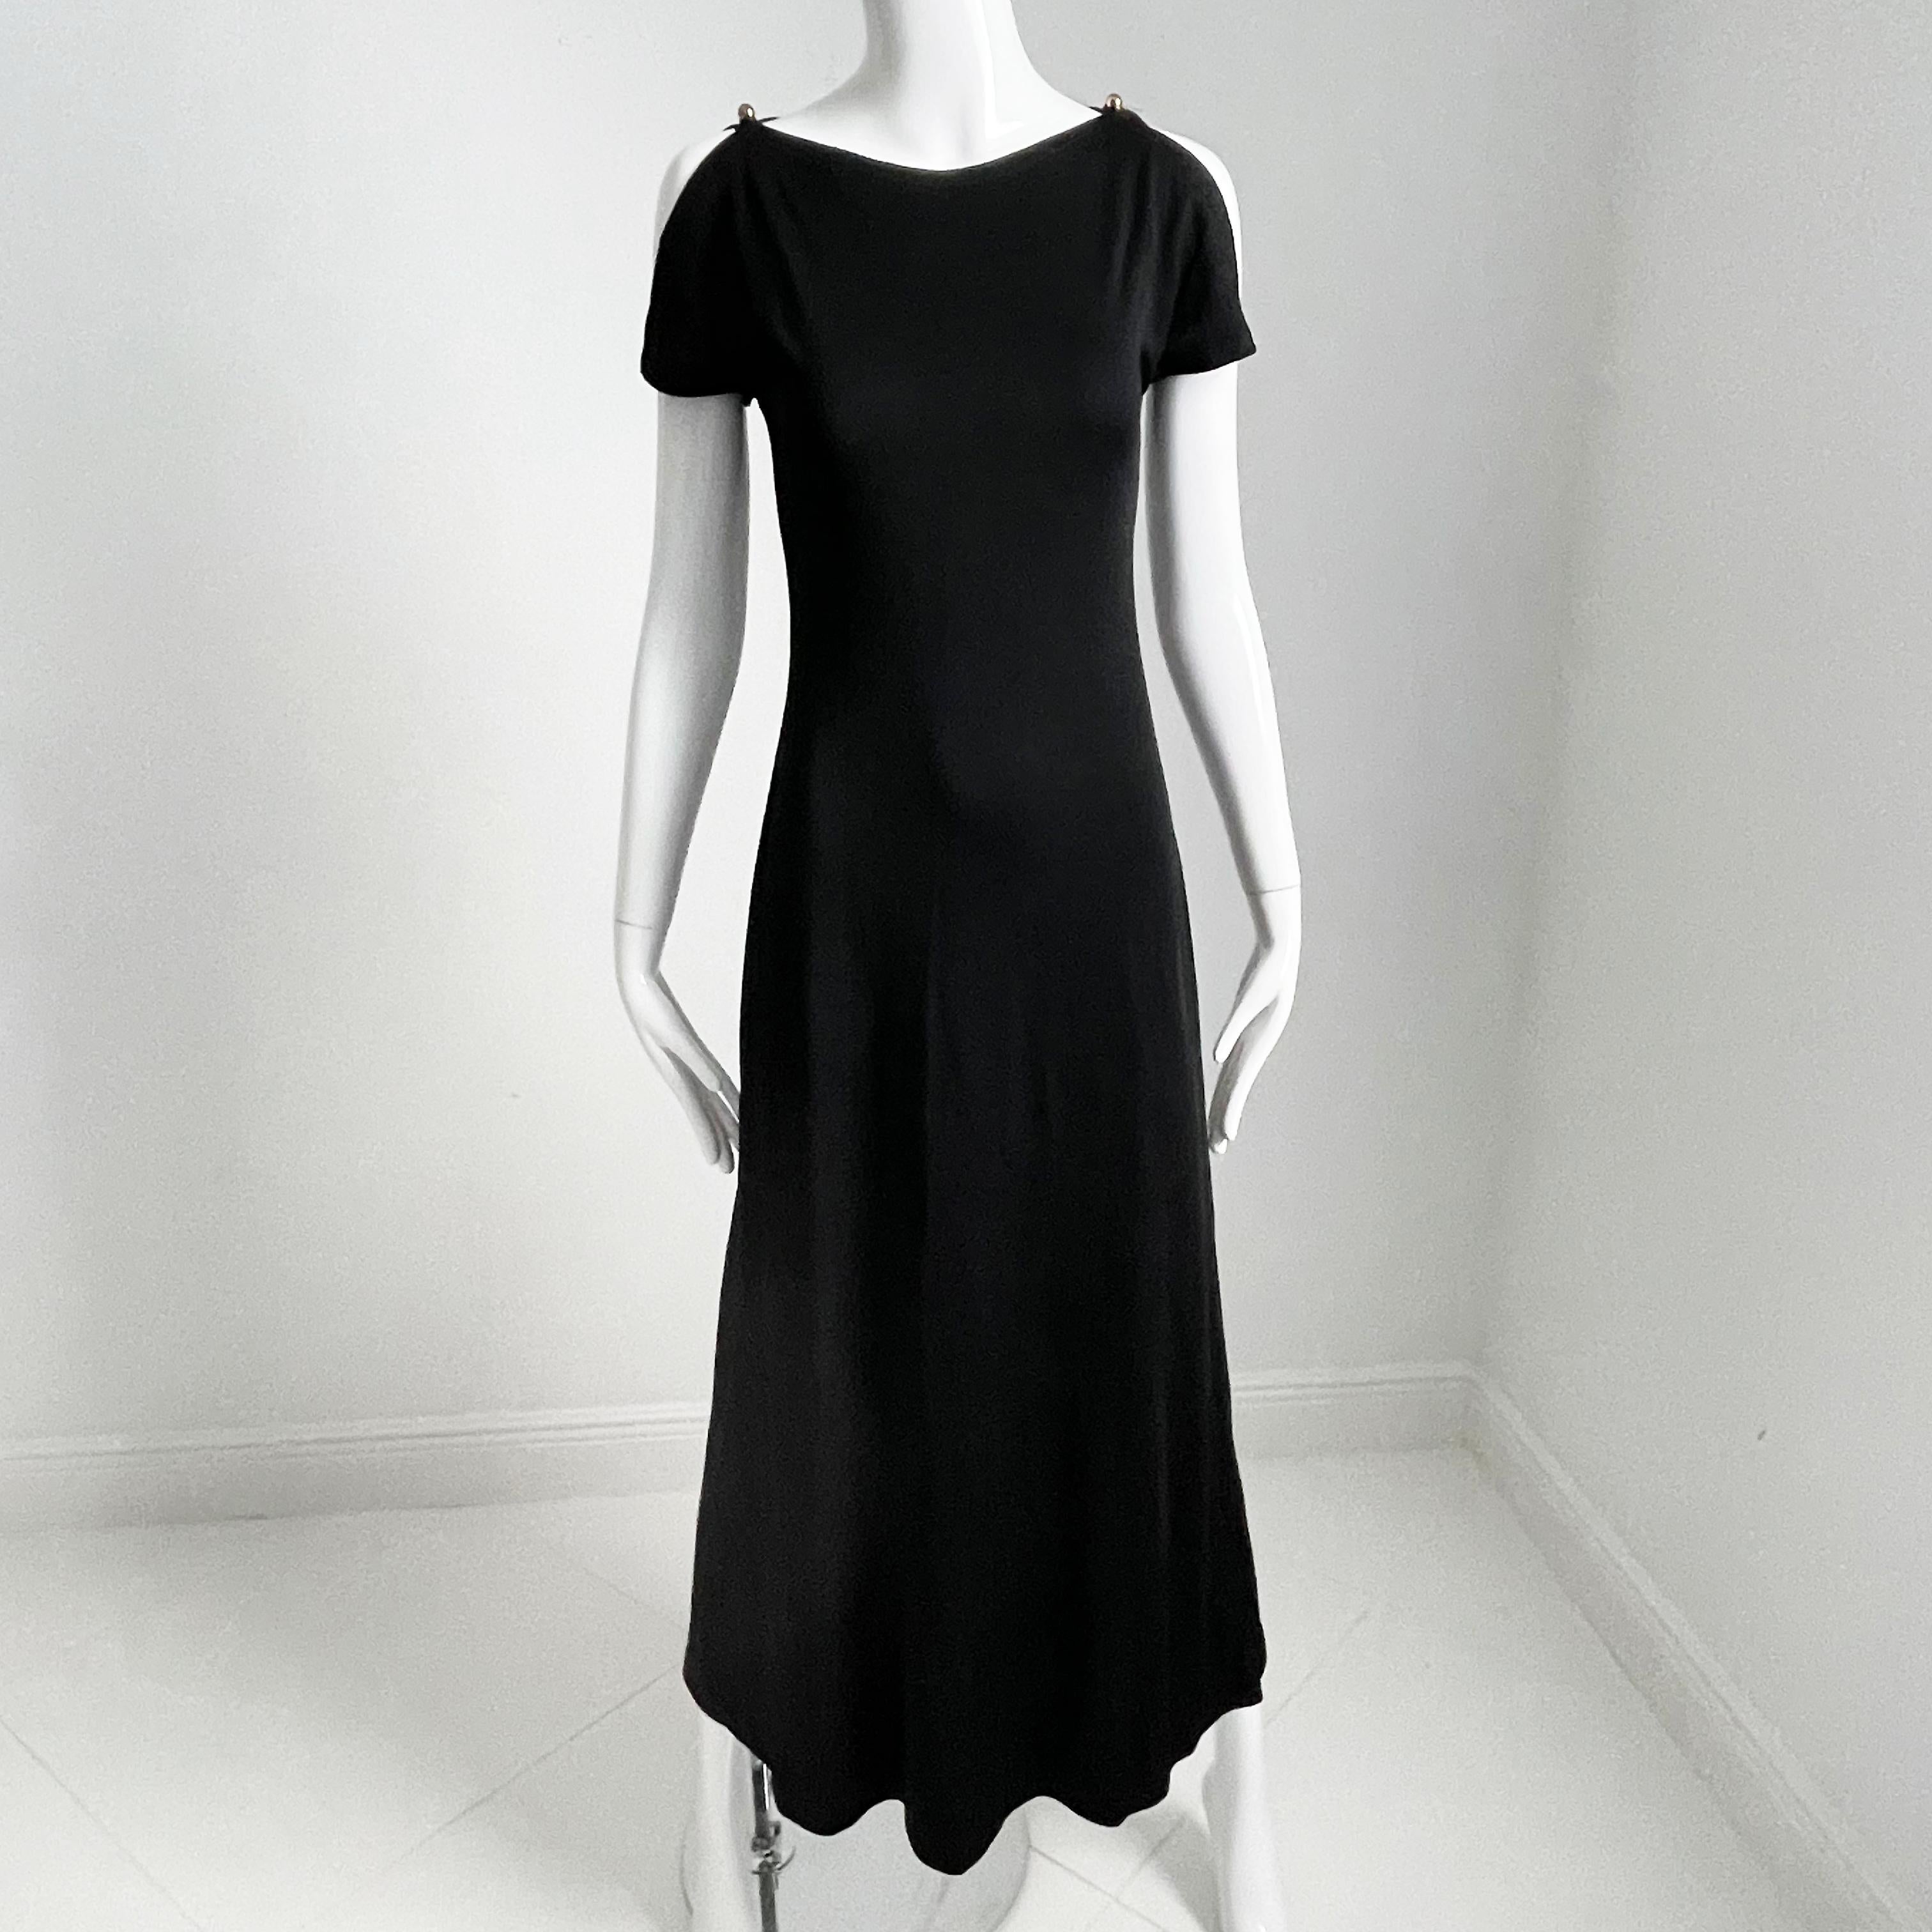 Clovis Ruffin Maxi Dress Black Jersey Flutter Sleeves Saks 5th Ave 1970s  For Sale 1